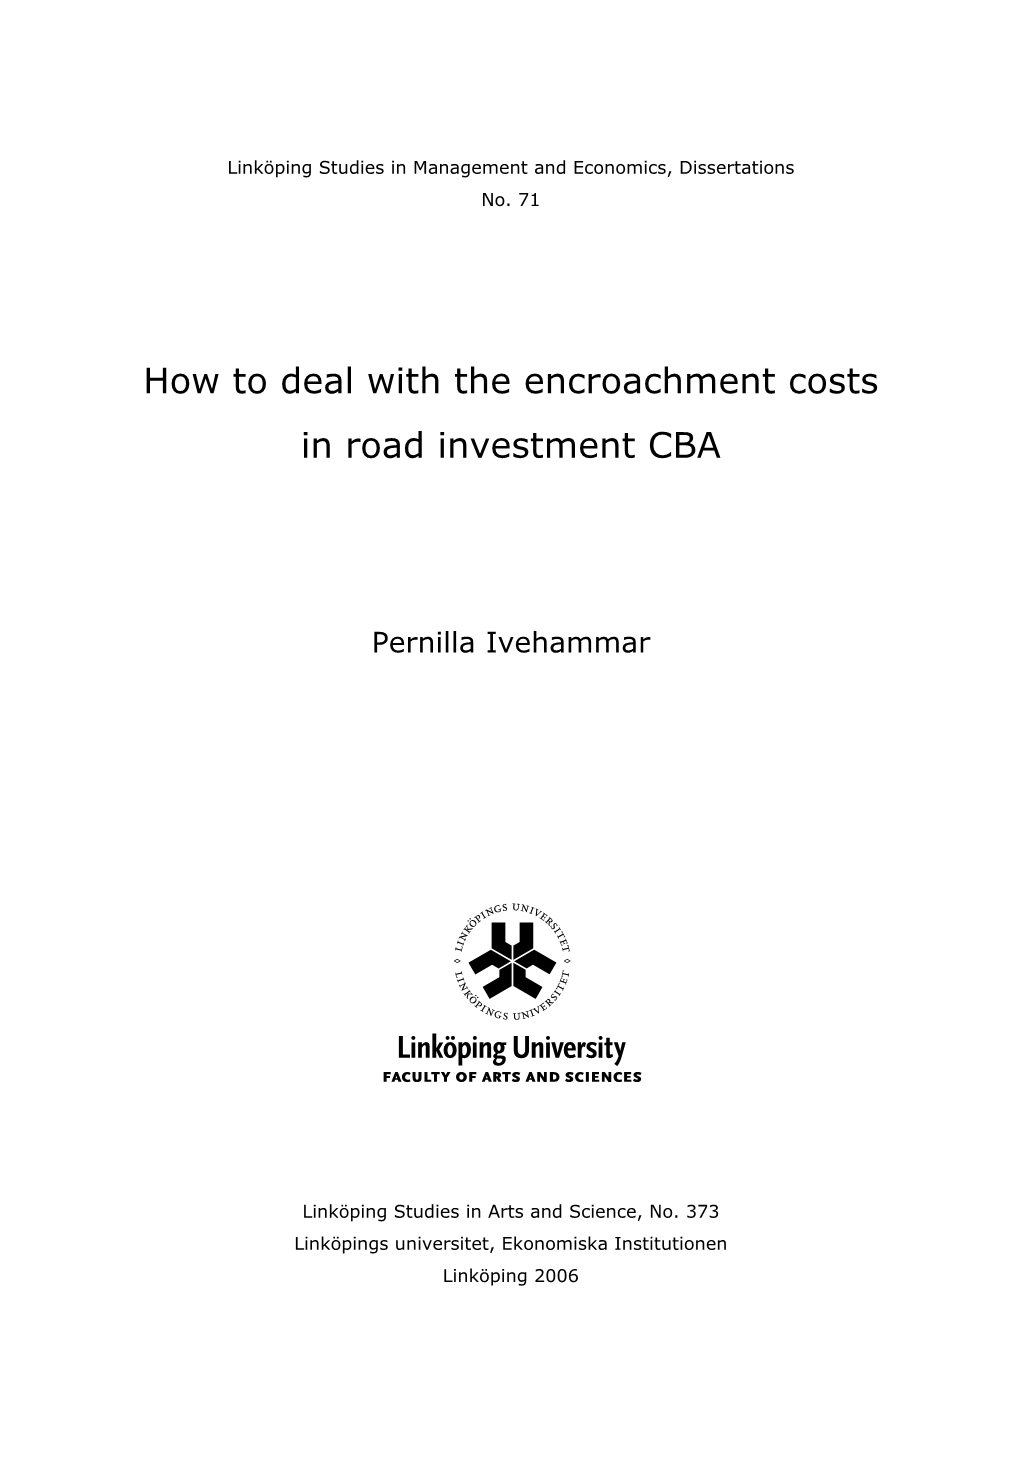 How to Deal with the Encroachment Costs in Road Investment CBA